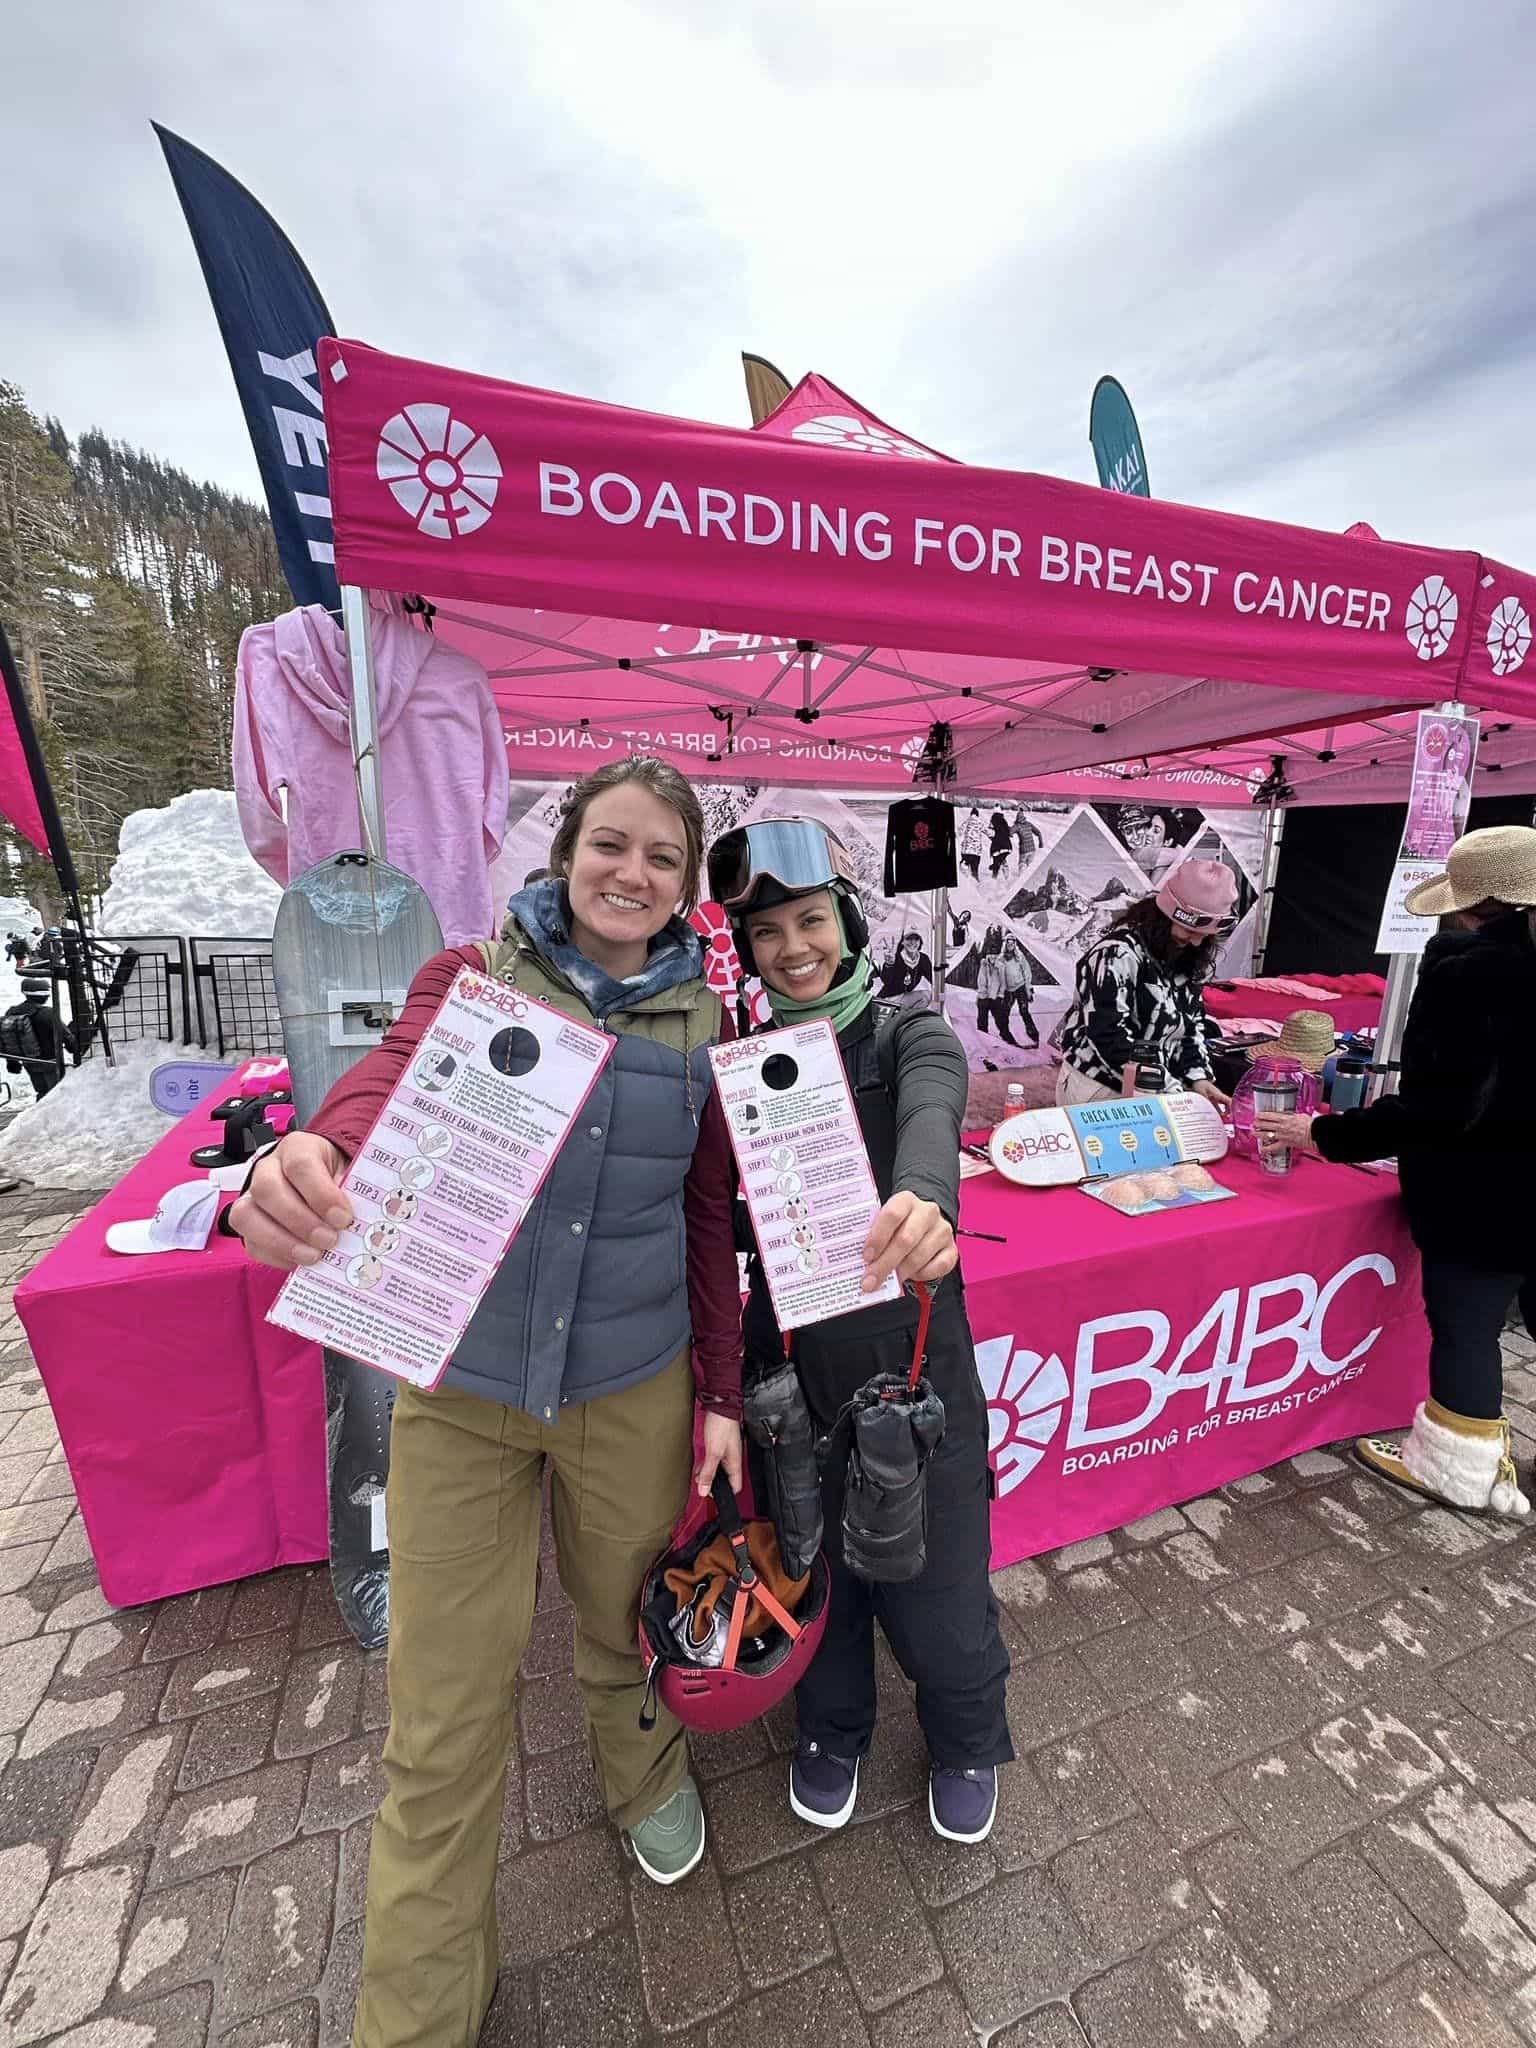 B4BC, boarding for breast cancer